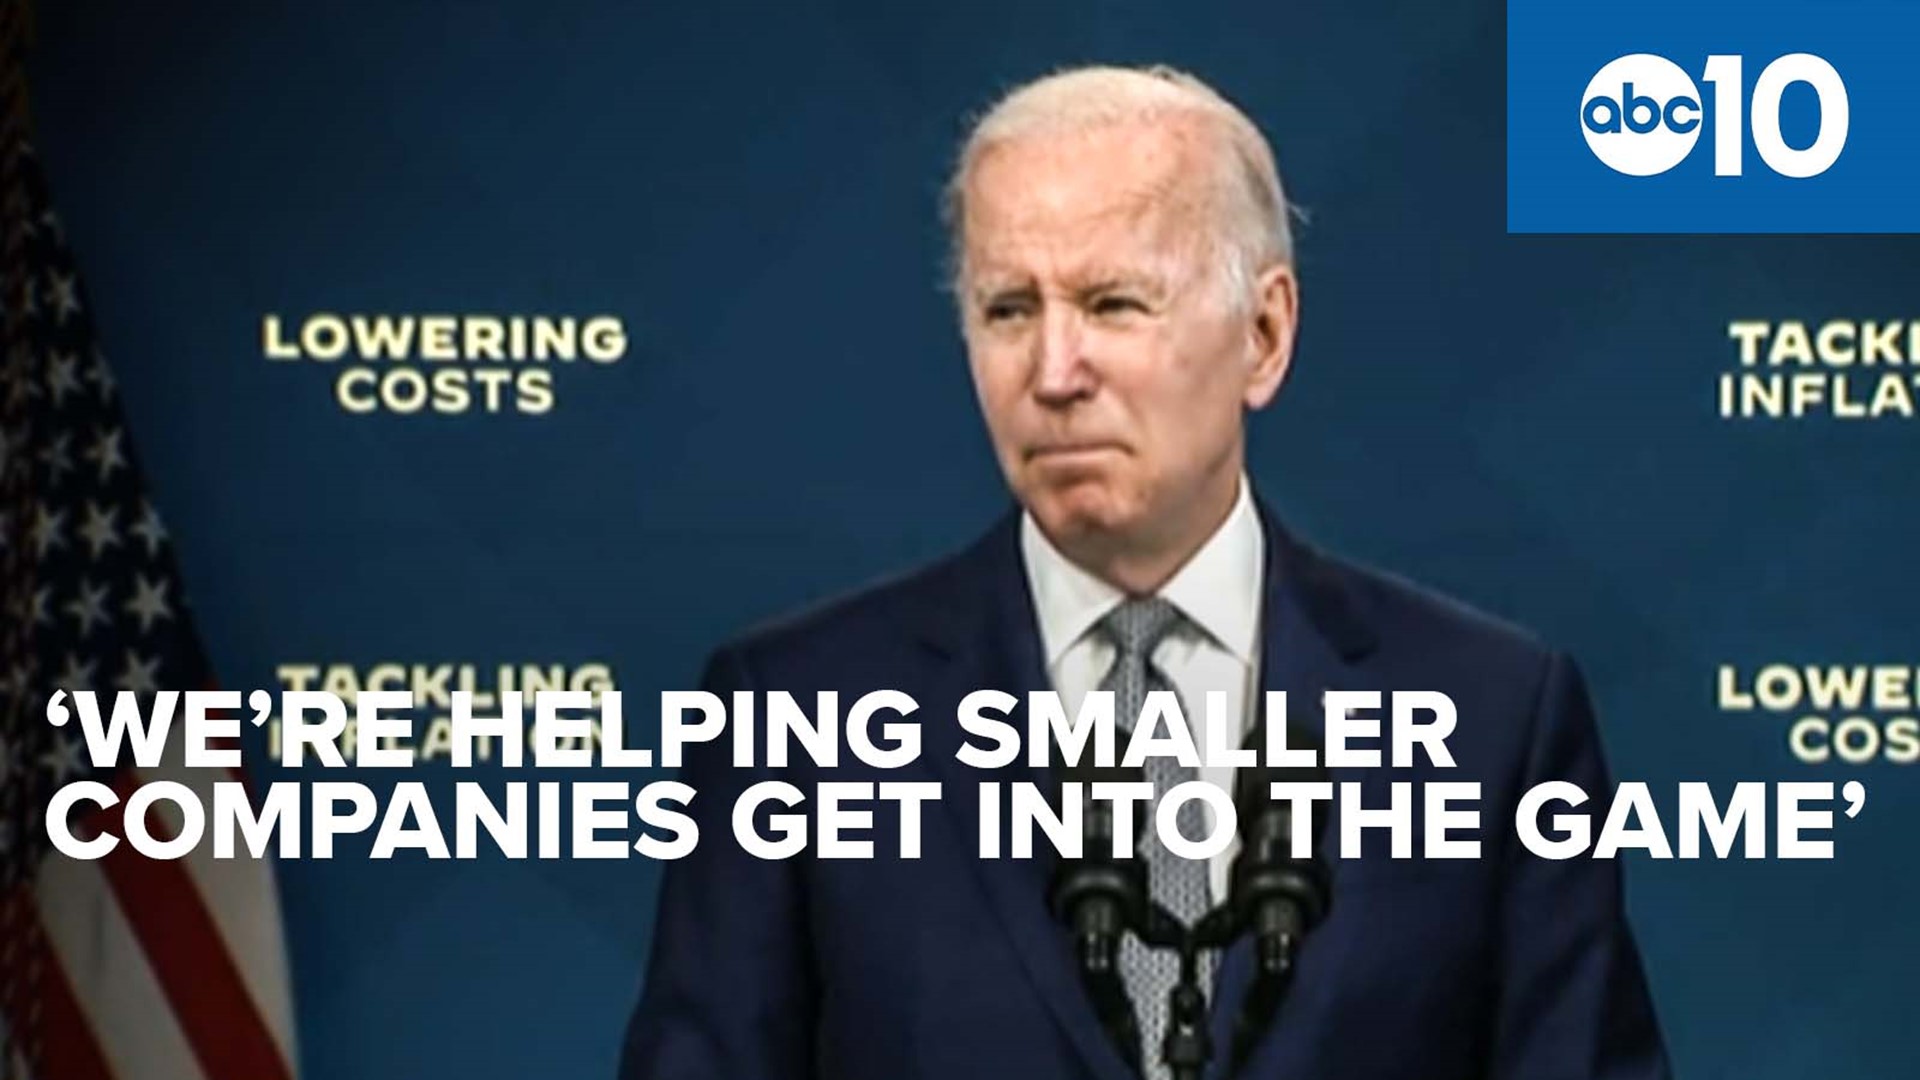 Increasing competition, releasing more oil from strategic reserves and lowering taxes for middle class families are some of President Biden's solutions.